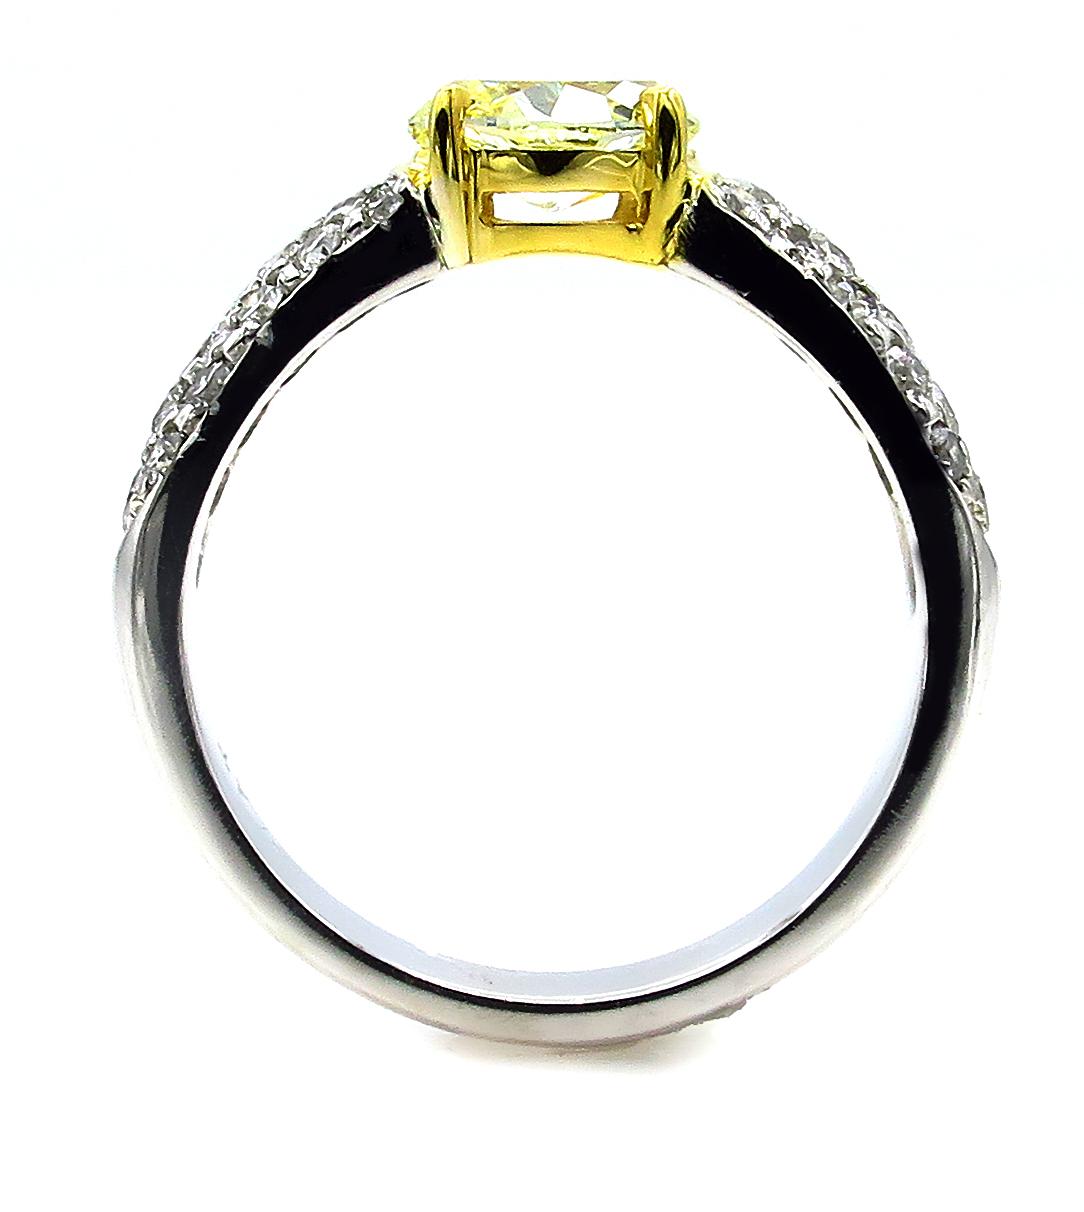 Women's GIA 1.62 Carat Natural Fancy Yellow Oval Diamond Engagement Ring Pave Platinum